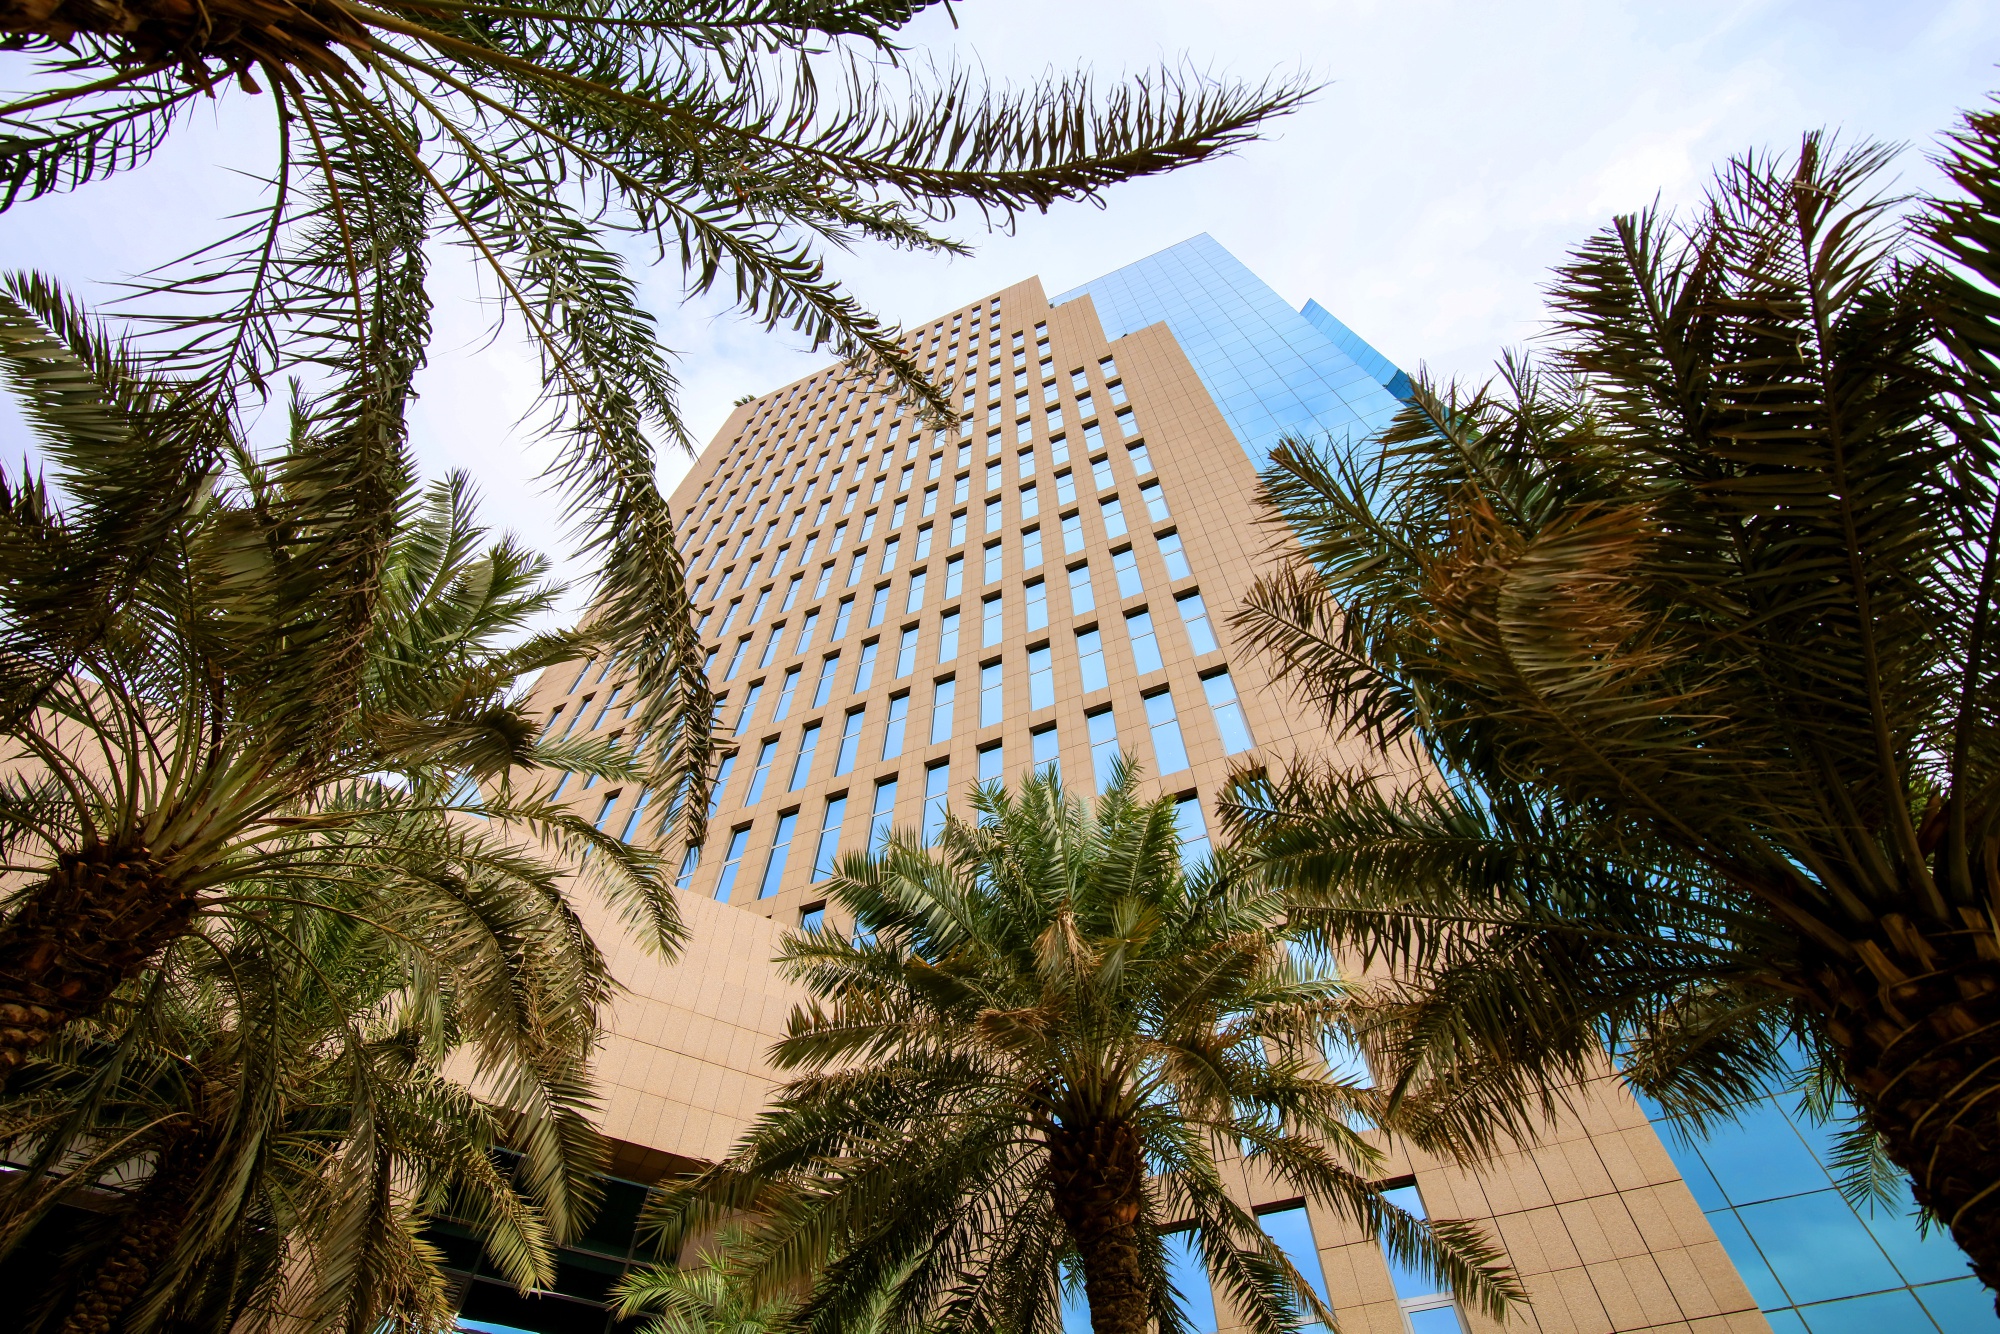 The commercial building housing the offices of the Saudi Stock Exchange, also known as Tadawul, in Riyadh.